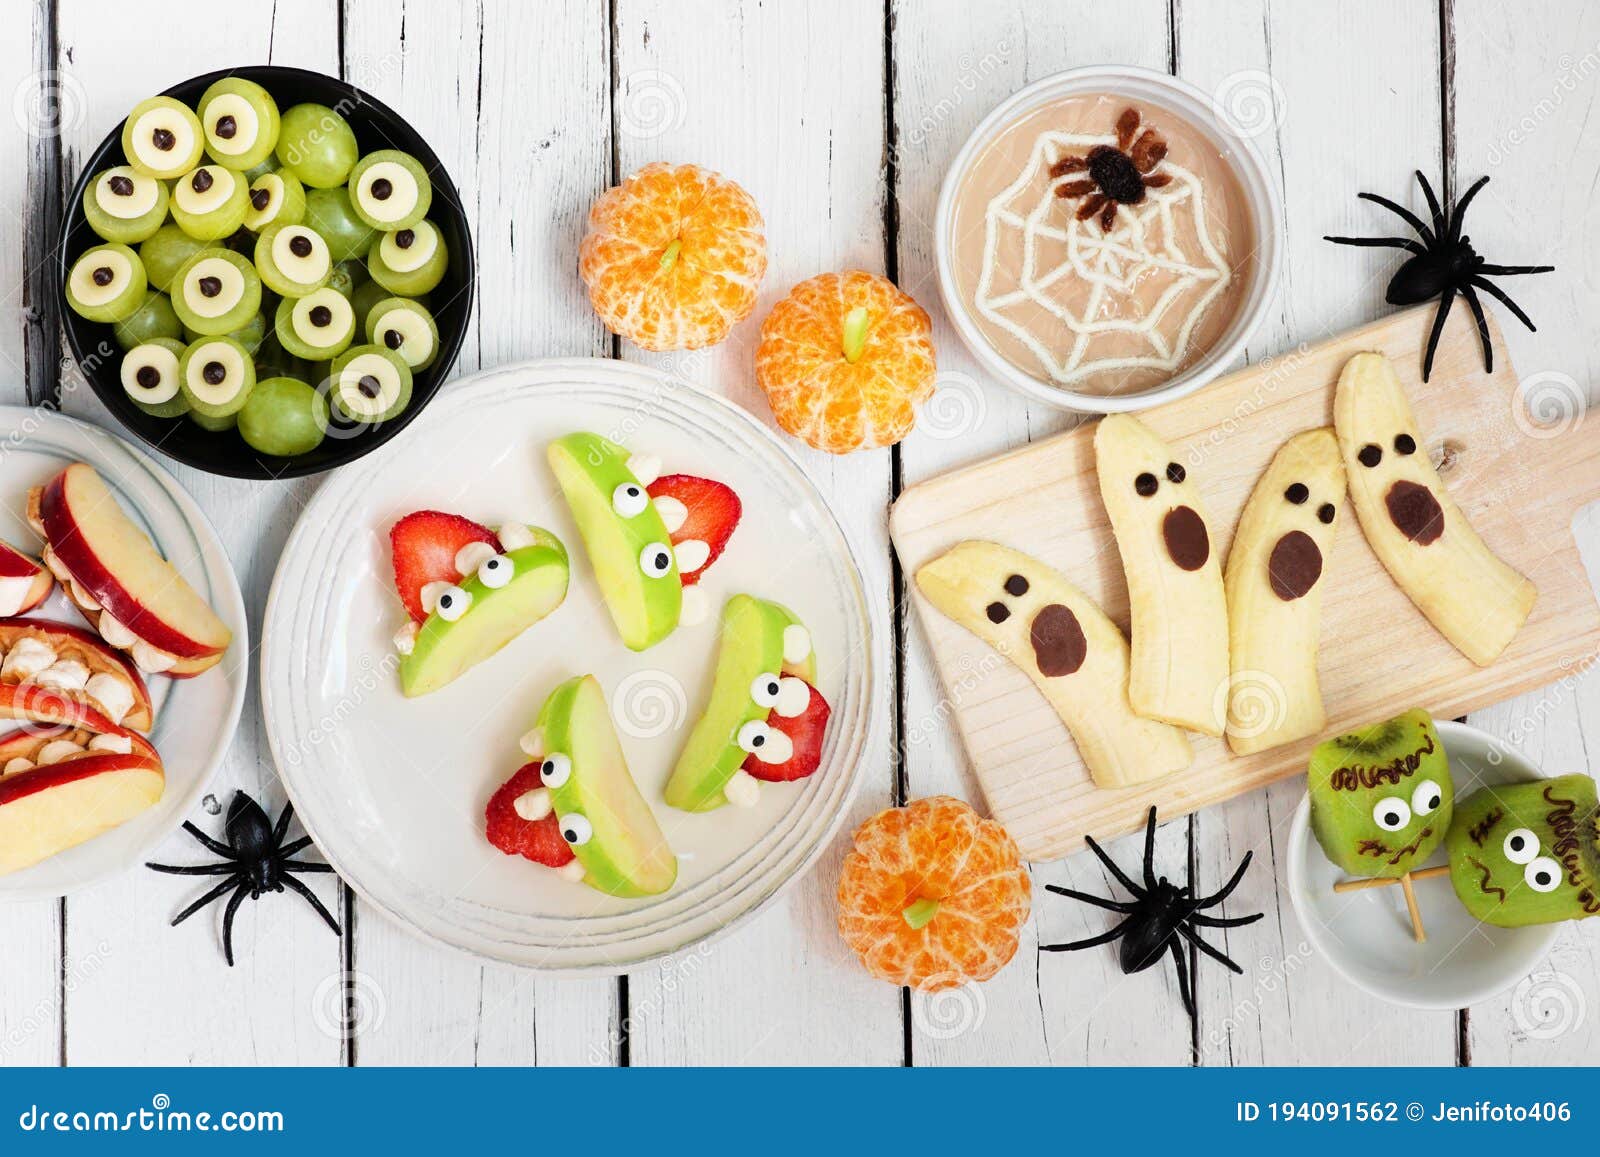 Healthy Halloween  Fruit  Snack  Table Scene Over A White 